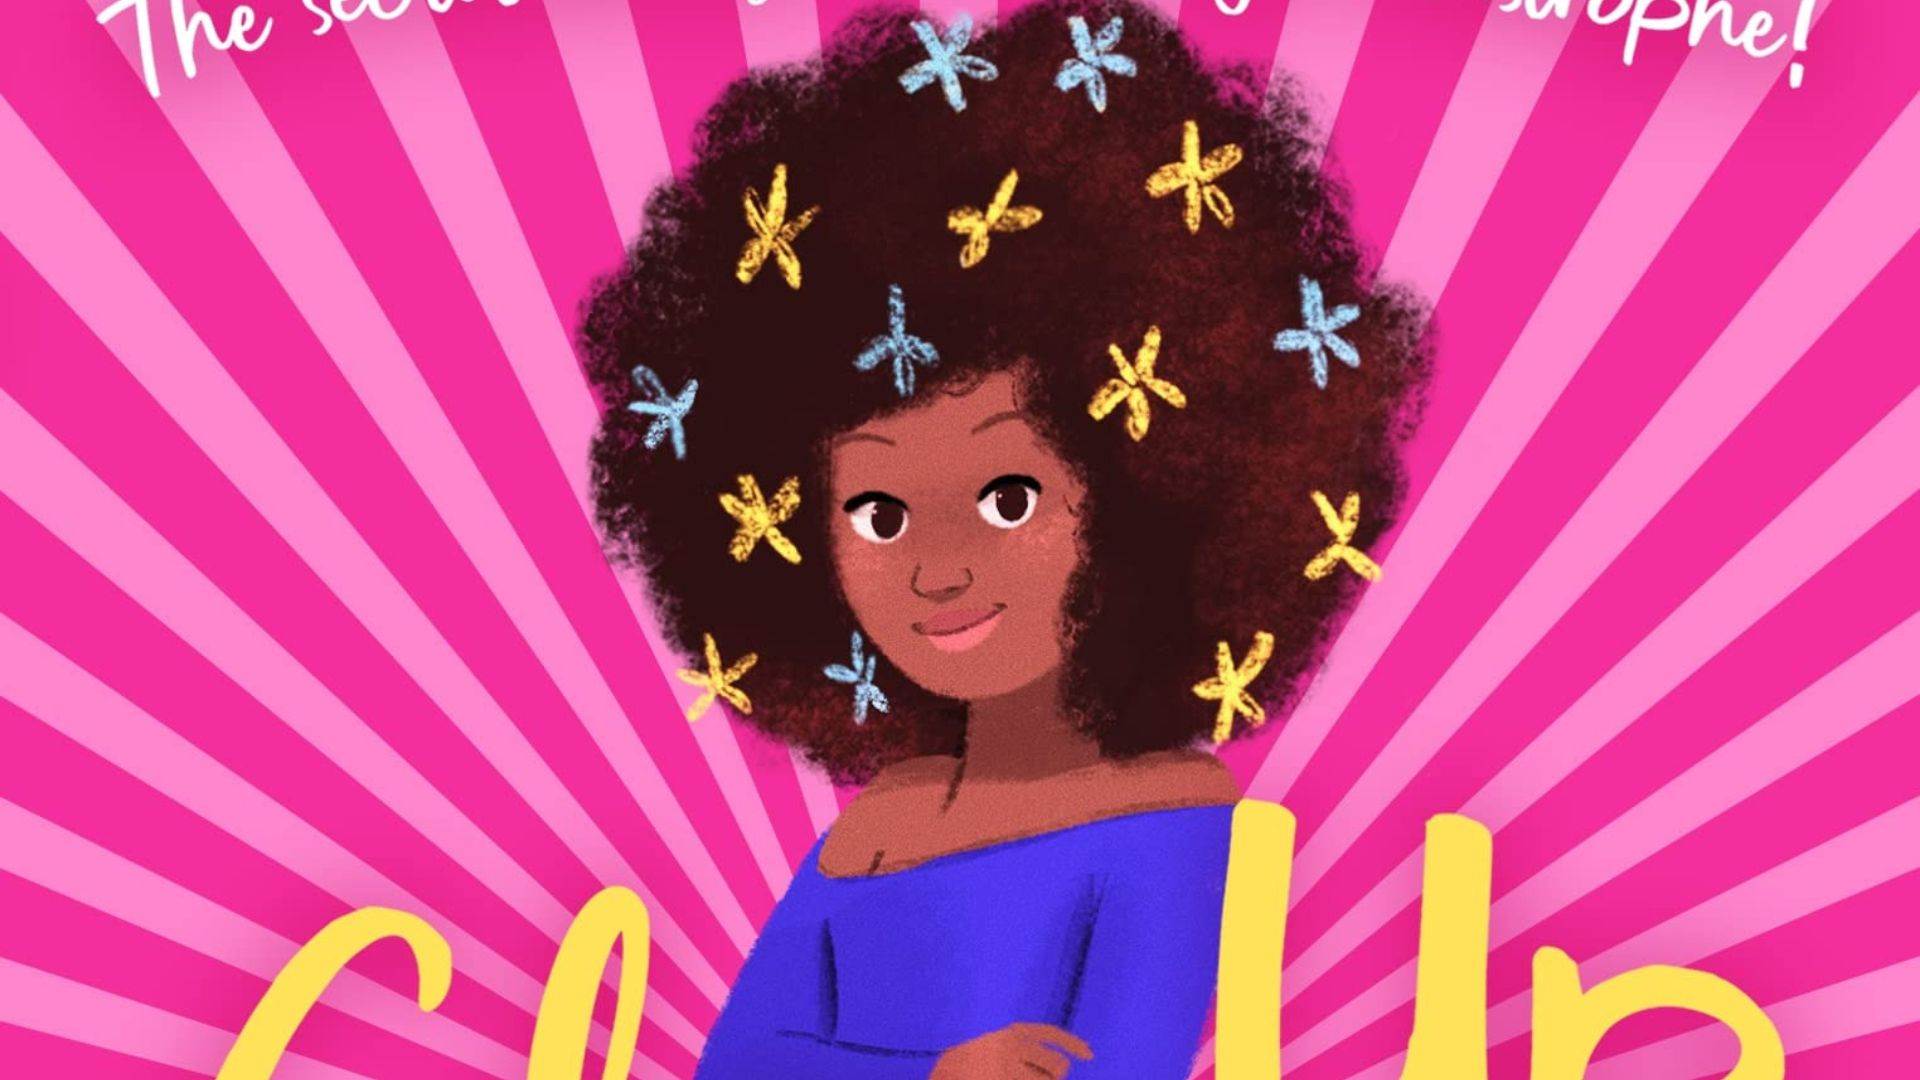 Illustration from the cover of Glow Up, Lara Bloom